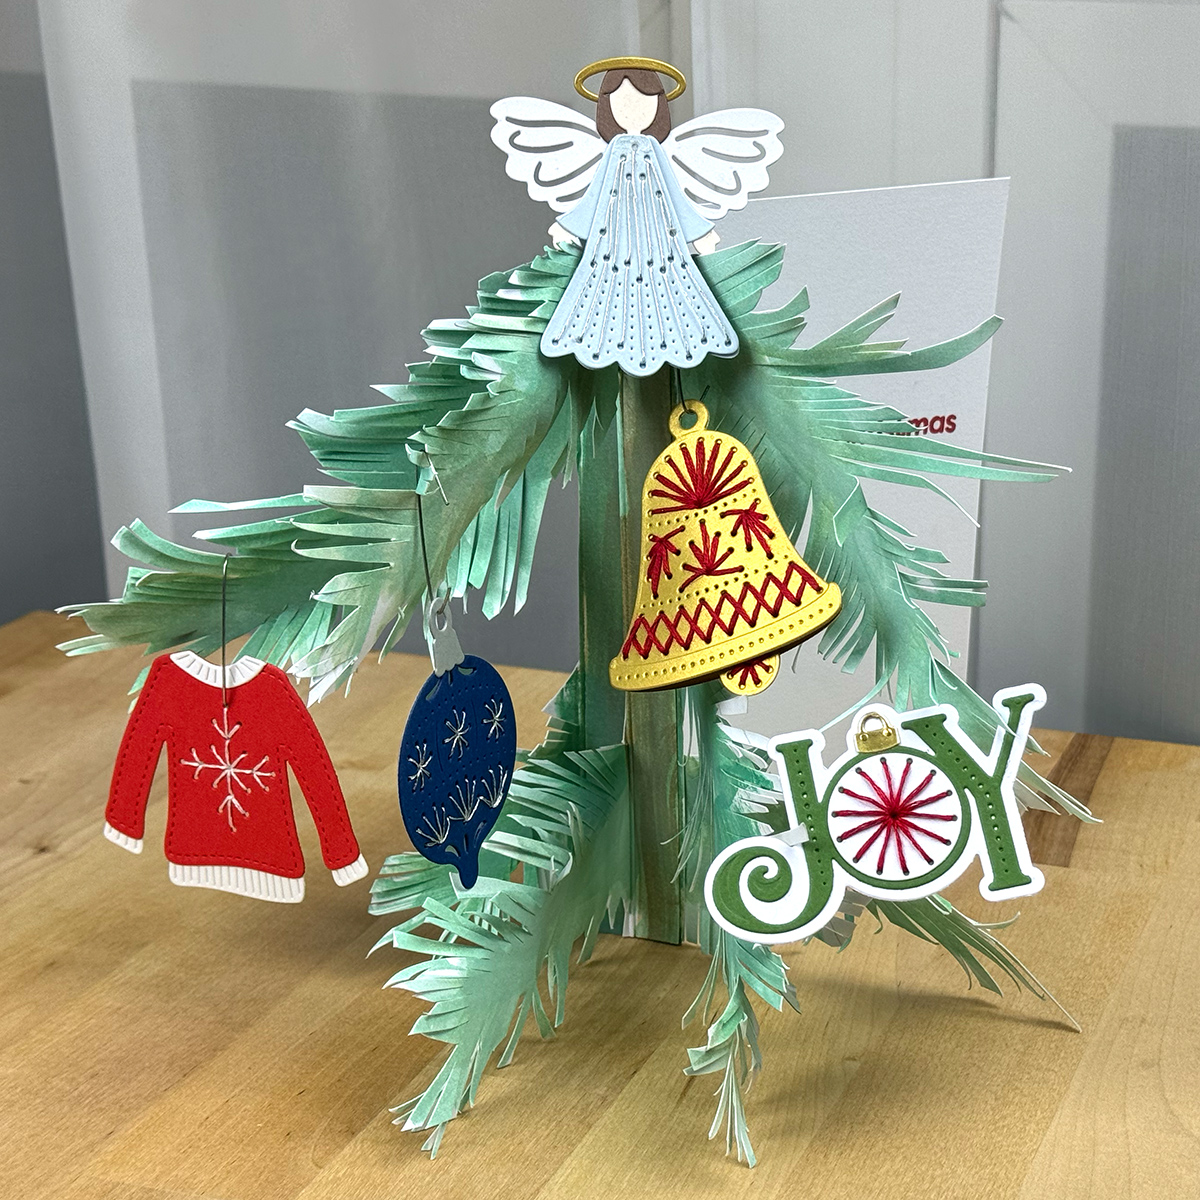 A christmas tree card with ornaments on it.